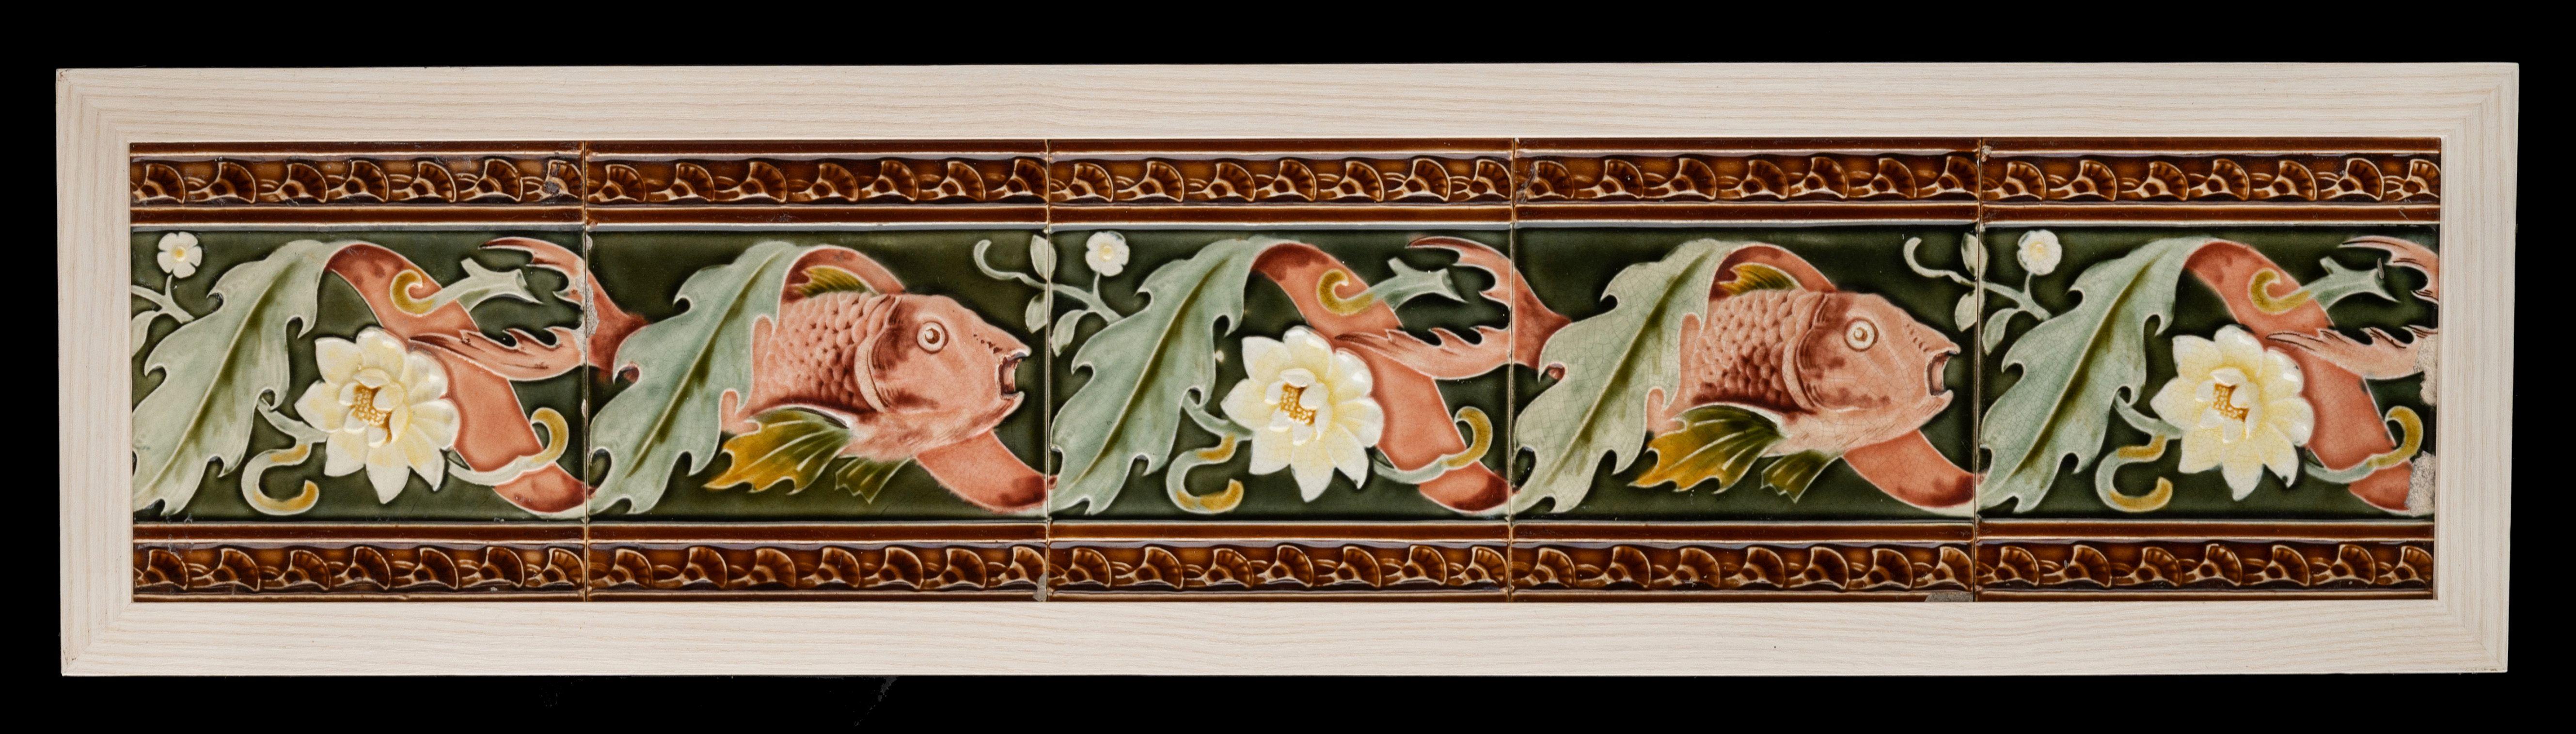 A set of five beautiful art nouveau wall tiles in a wooden frame.
Each individual tile is approximately 6